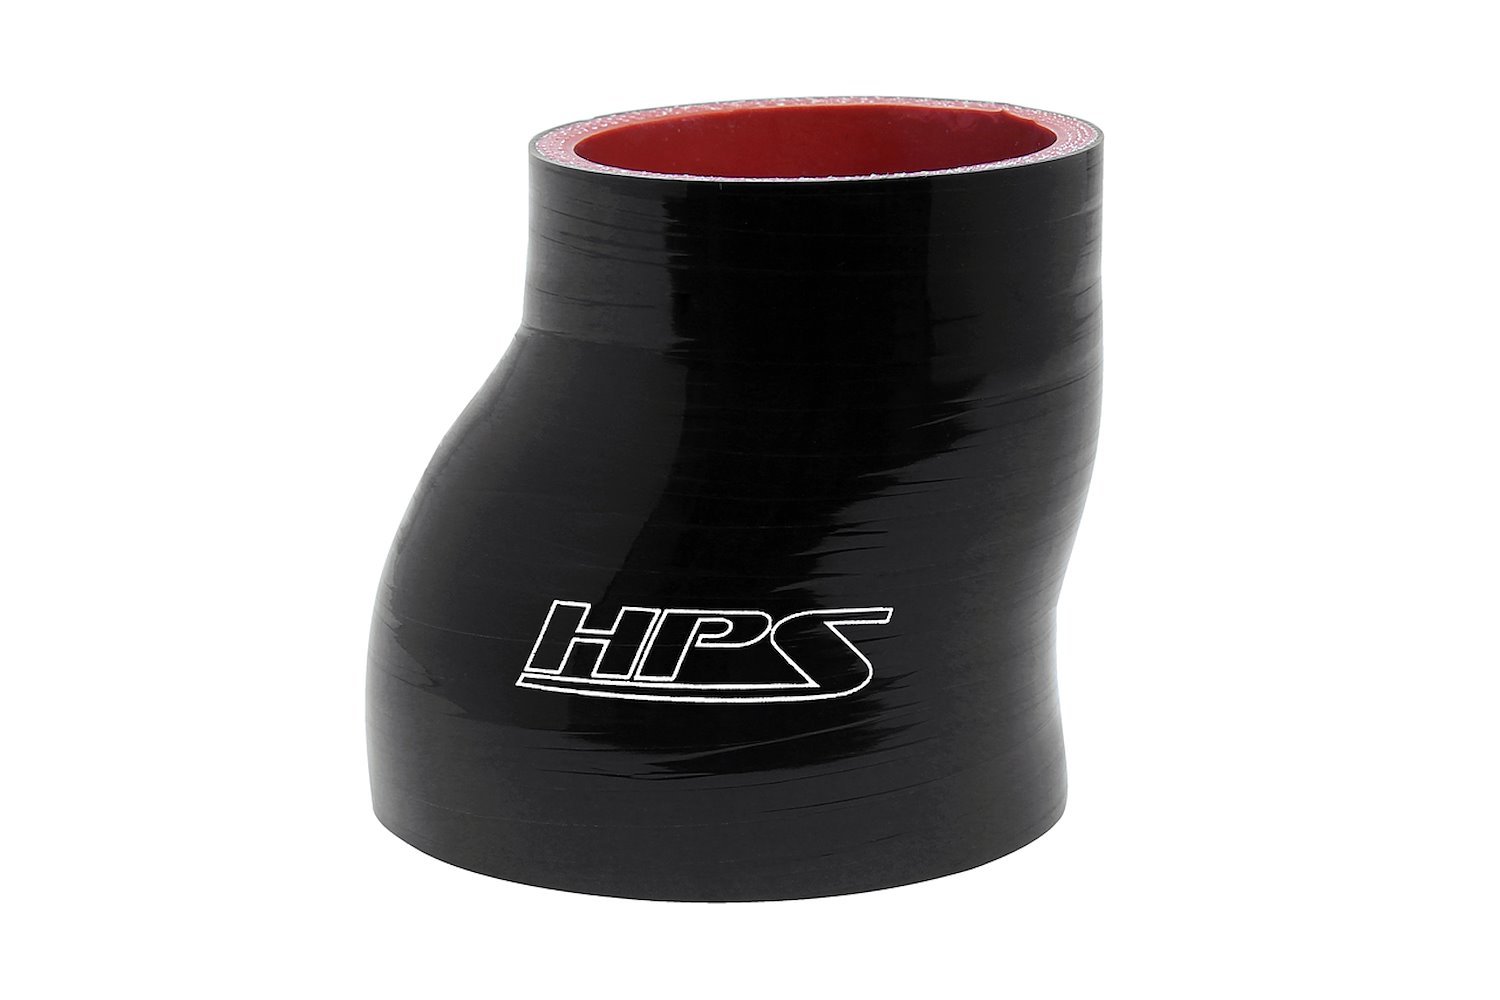 HTSOR-250-300-BLK Silicone Offset Reducer Hose, High-Temp Reinforced, 2-1/2 in. - 3 in. ID, 3 in. Long, Black